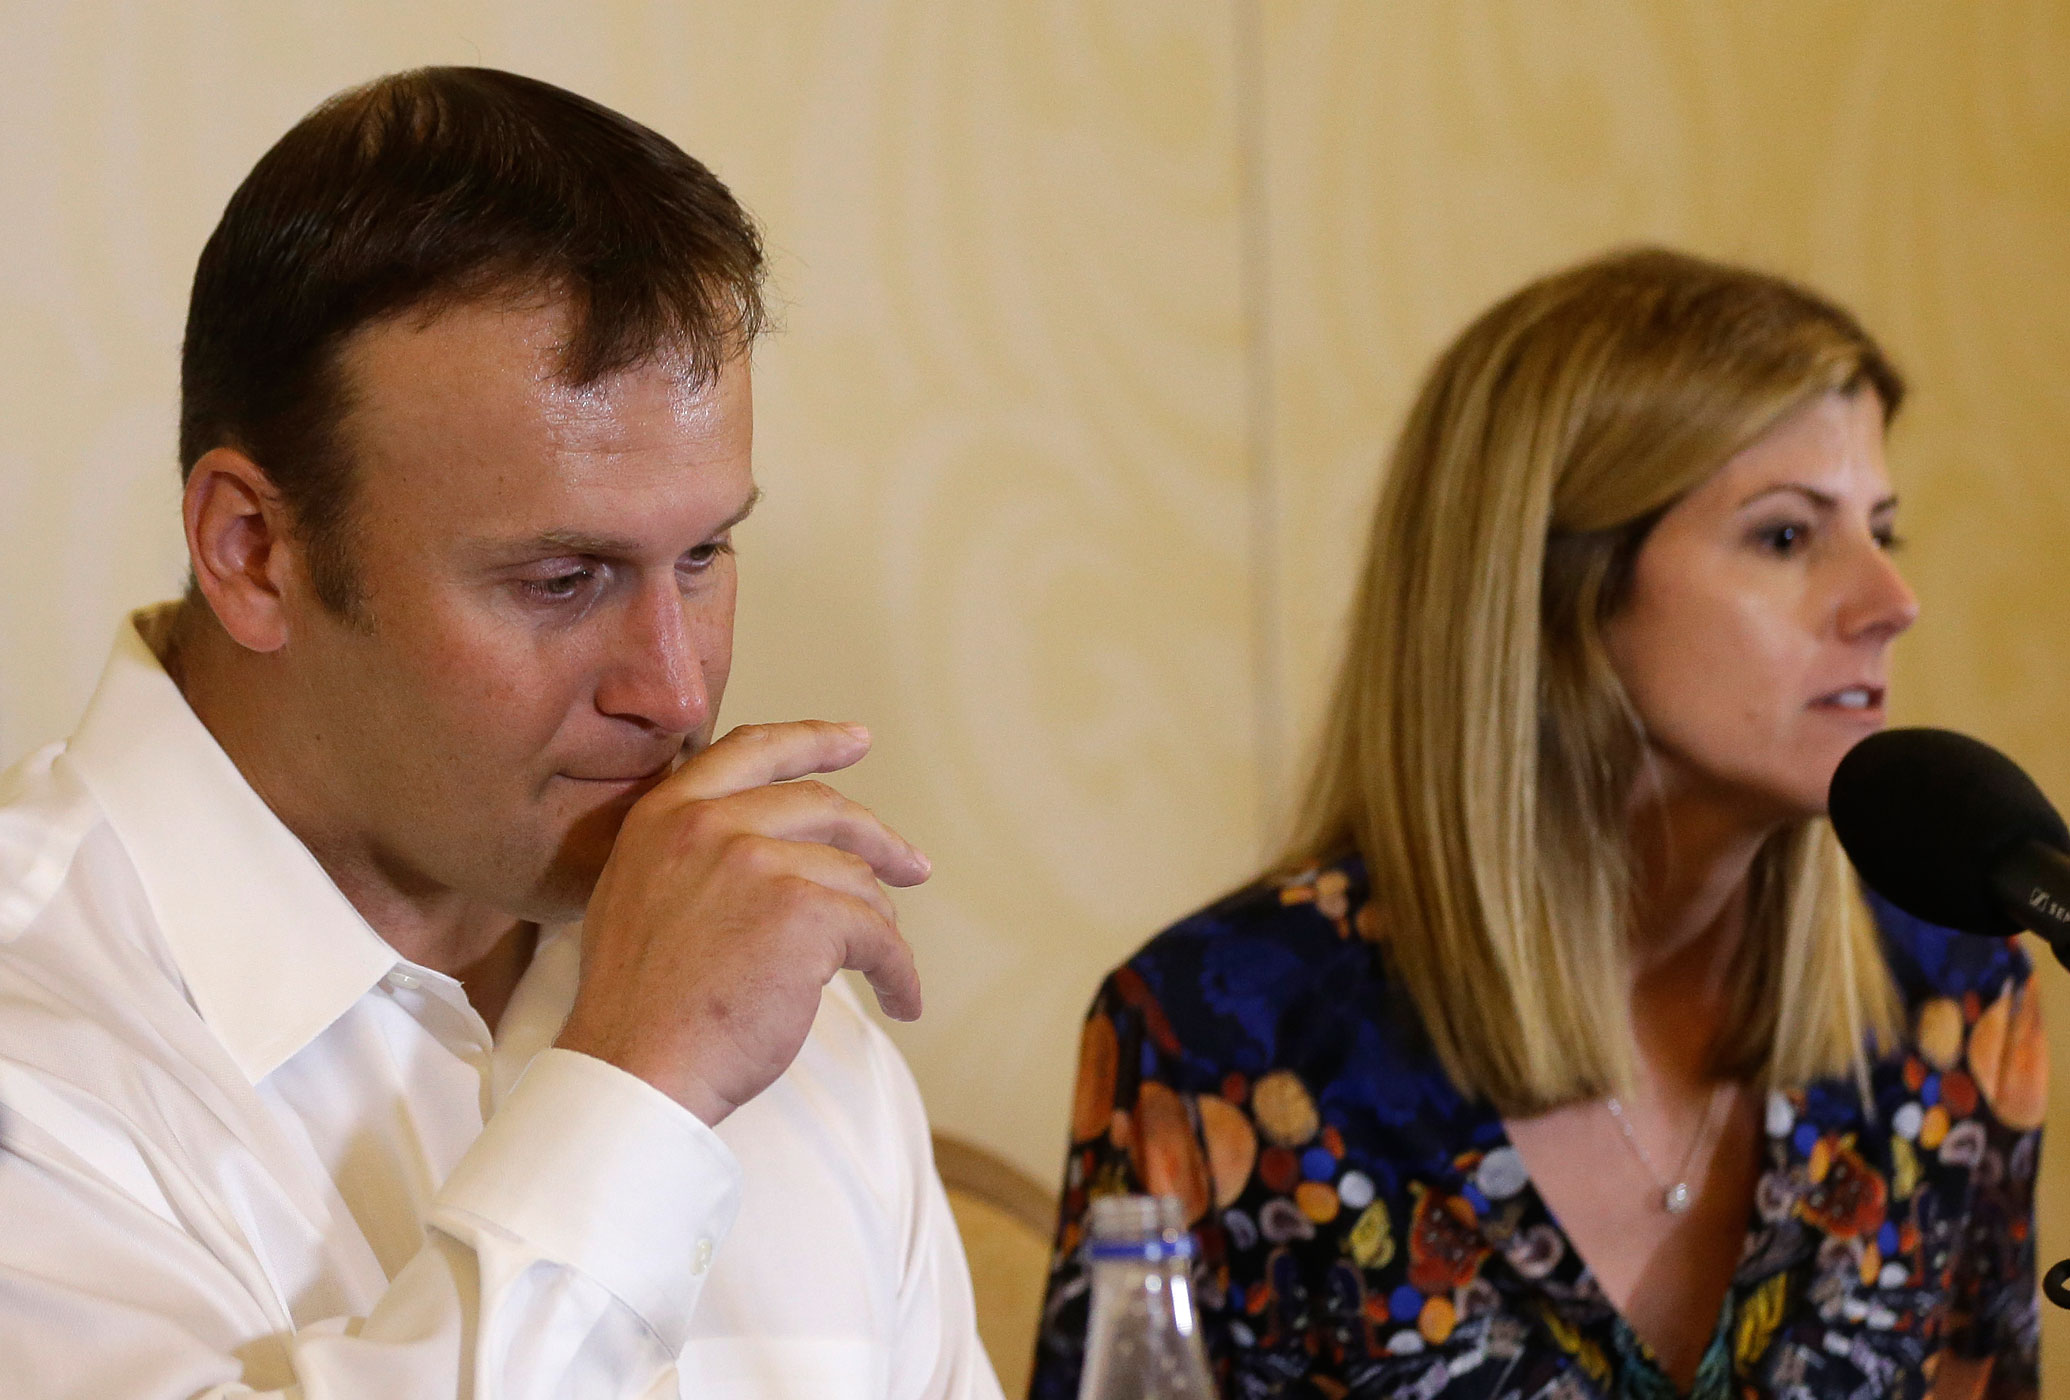 Former Miami Dolphins fullback Rob Konrad, left, listens while his wife Tammy, right, responds to a question during a news conference on Jan. 12, 2015, in Plantation, Fla. (Lynne Sladky—AP)